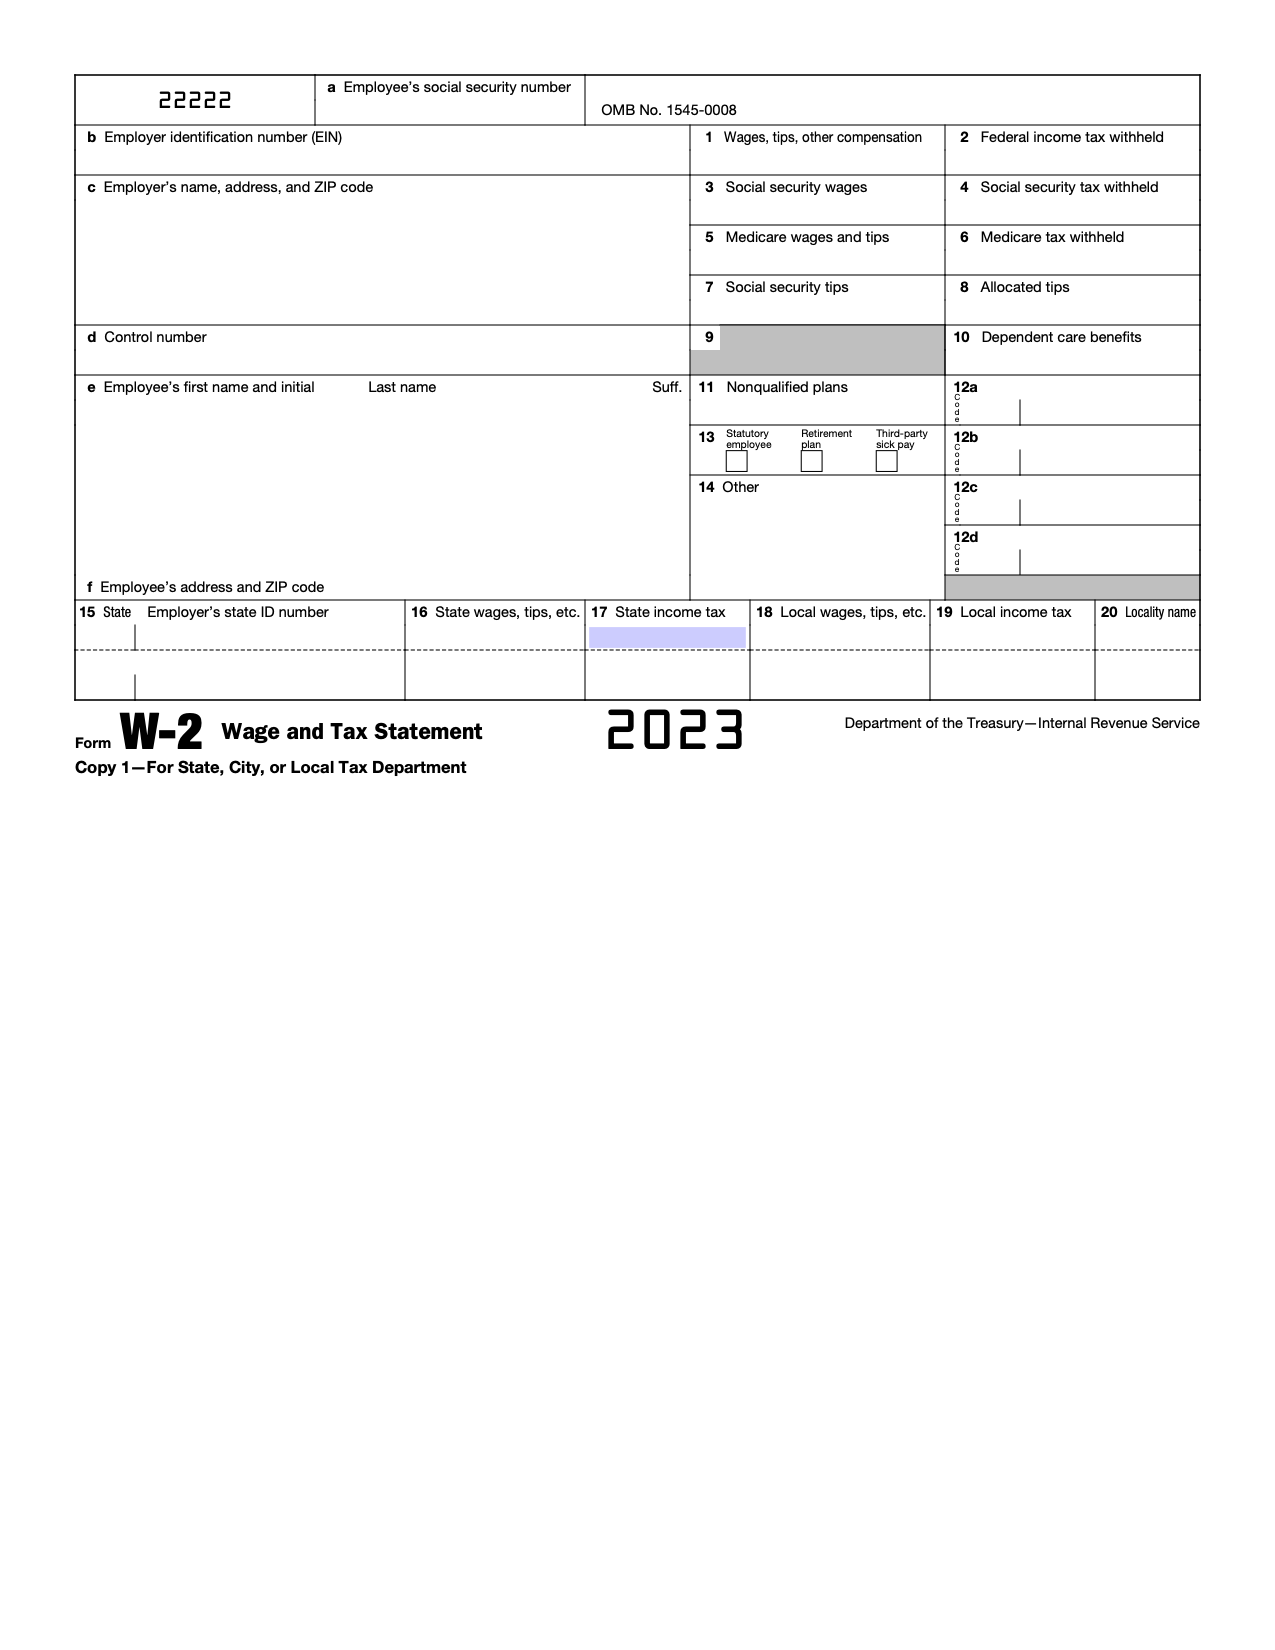 Free Irs Form W-2 | Wage And Tax Statement - Pdf – Eforms pertaining to Sample W2 Form 2023